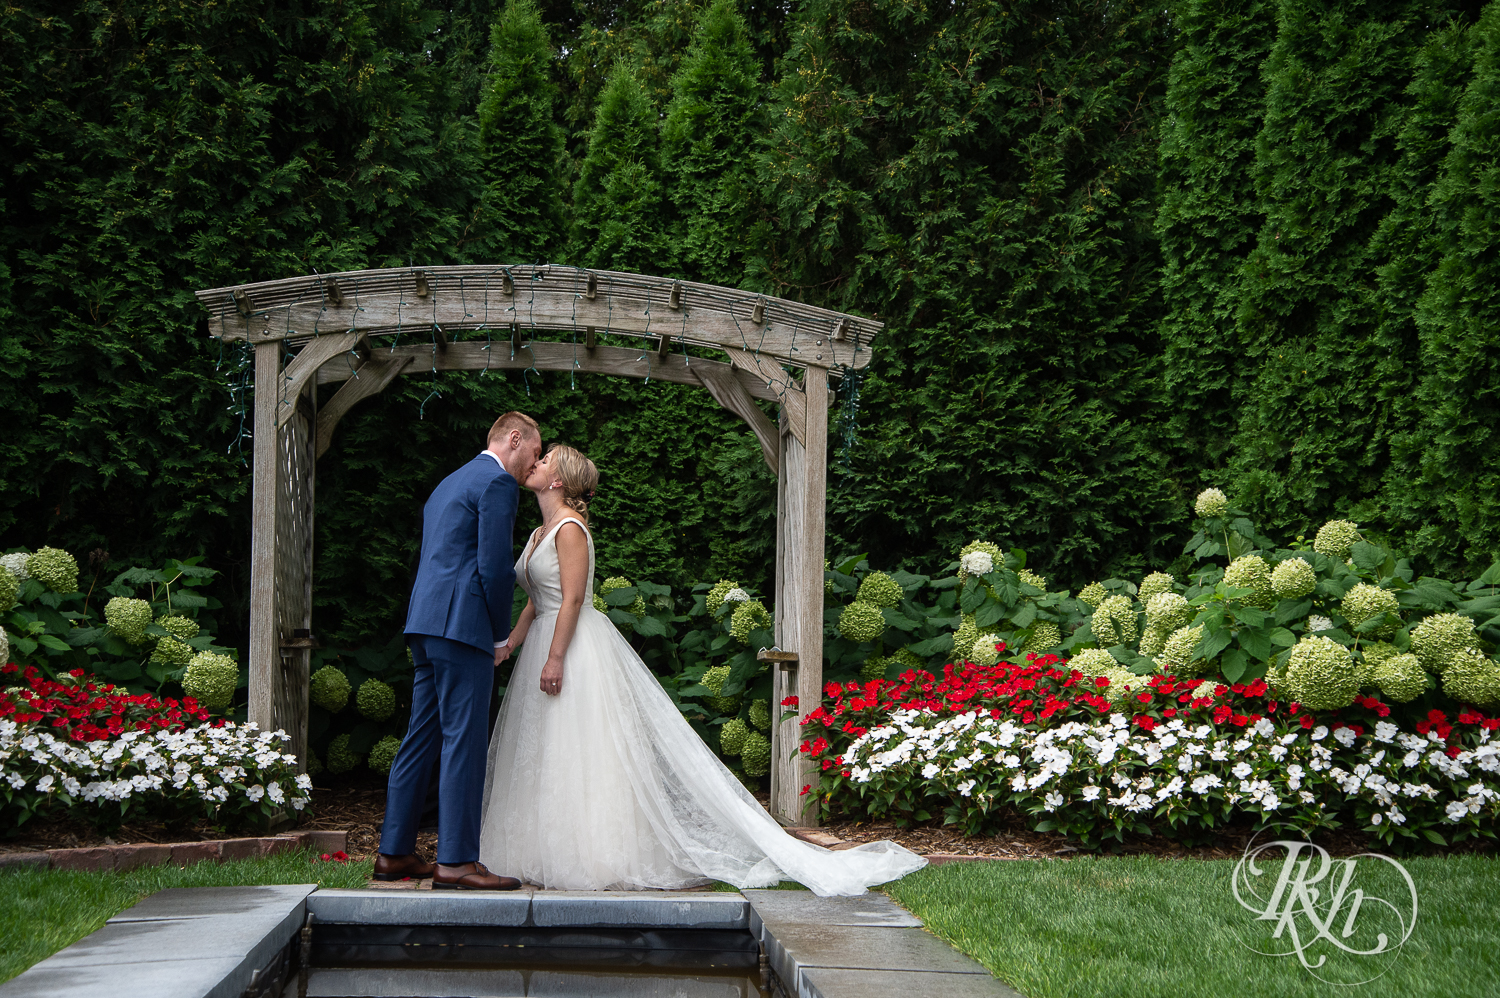 Bride and groom kiss at wedding ceremony at the William Sauntry Mansion in Stillwater, Minnesota.